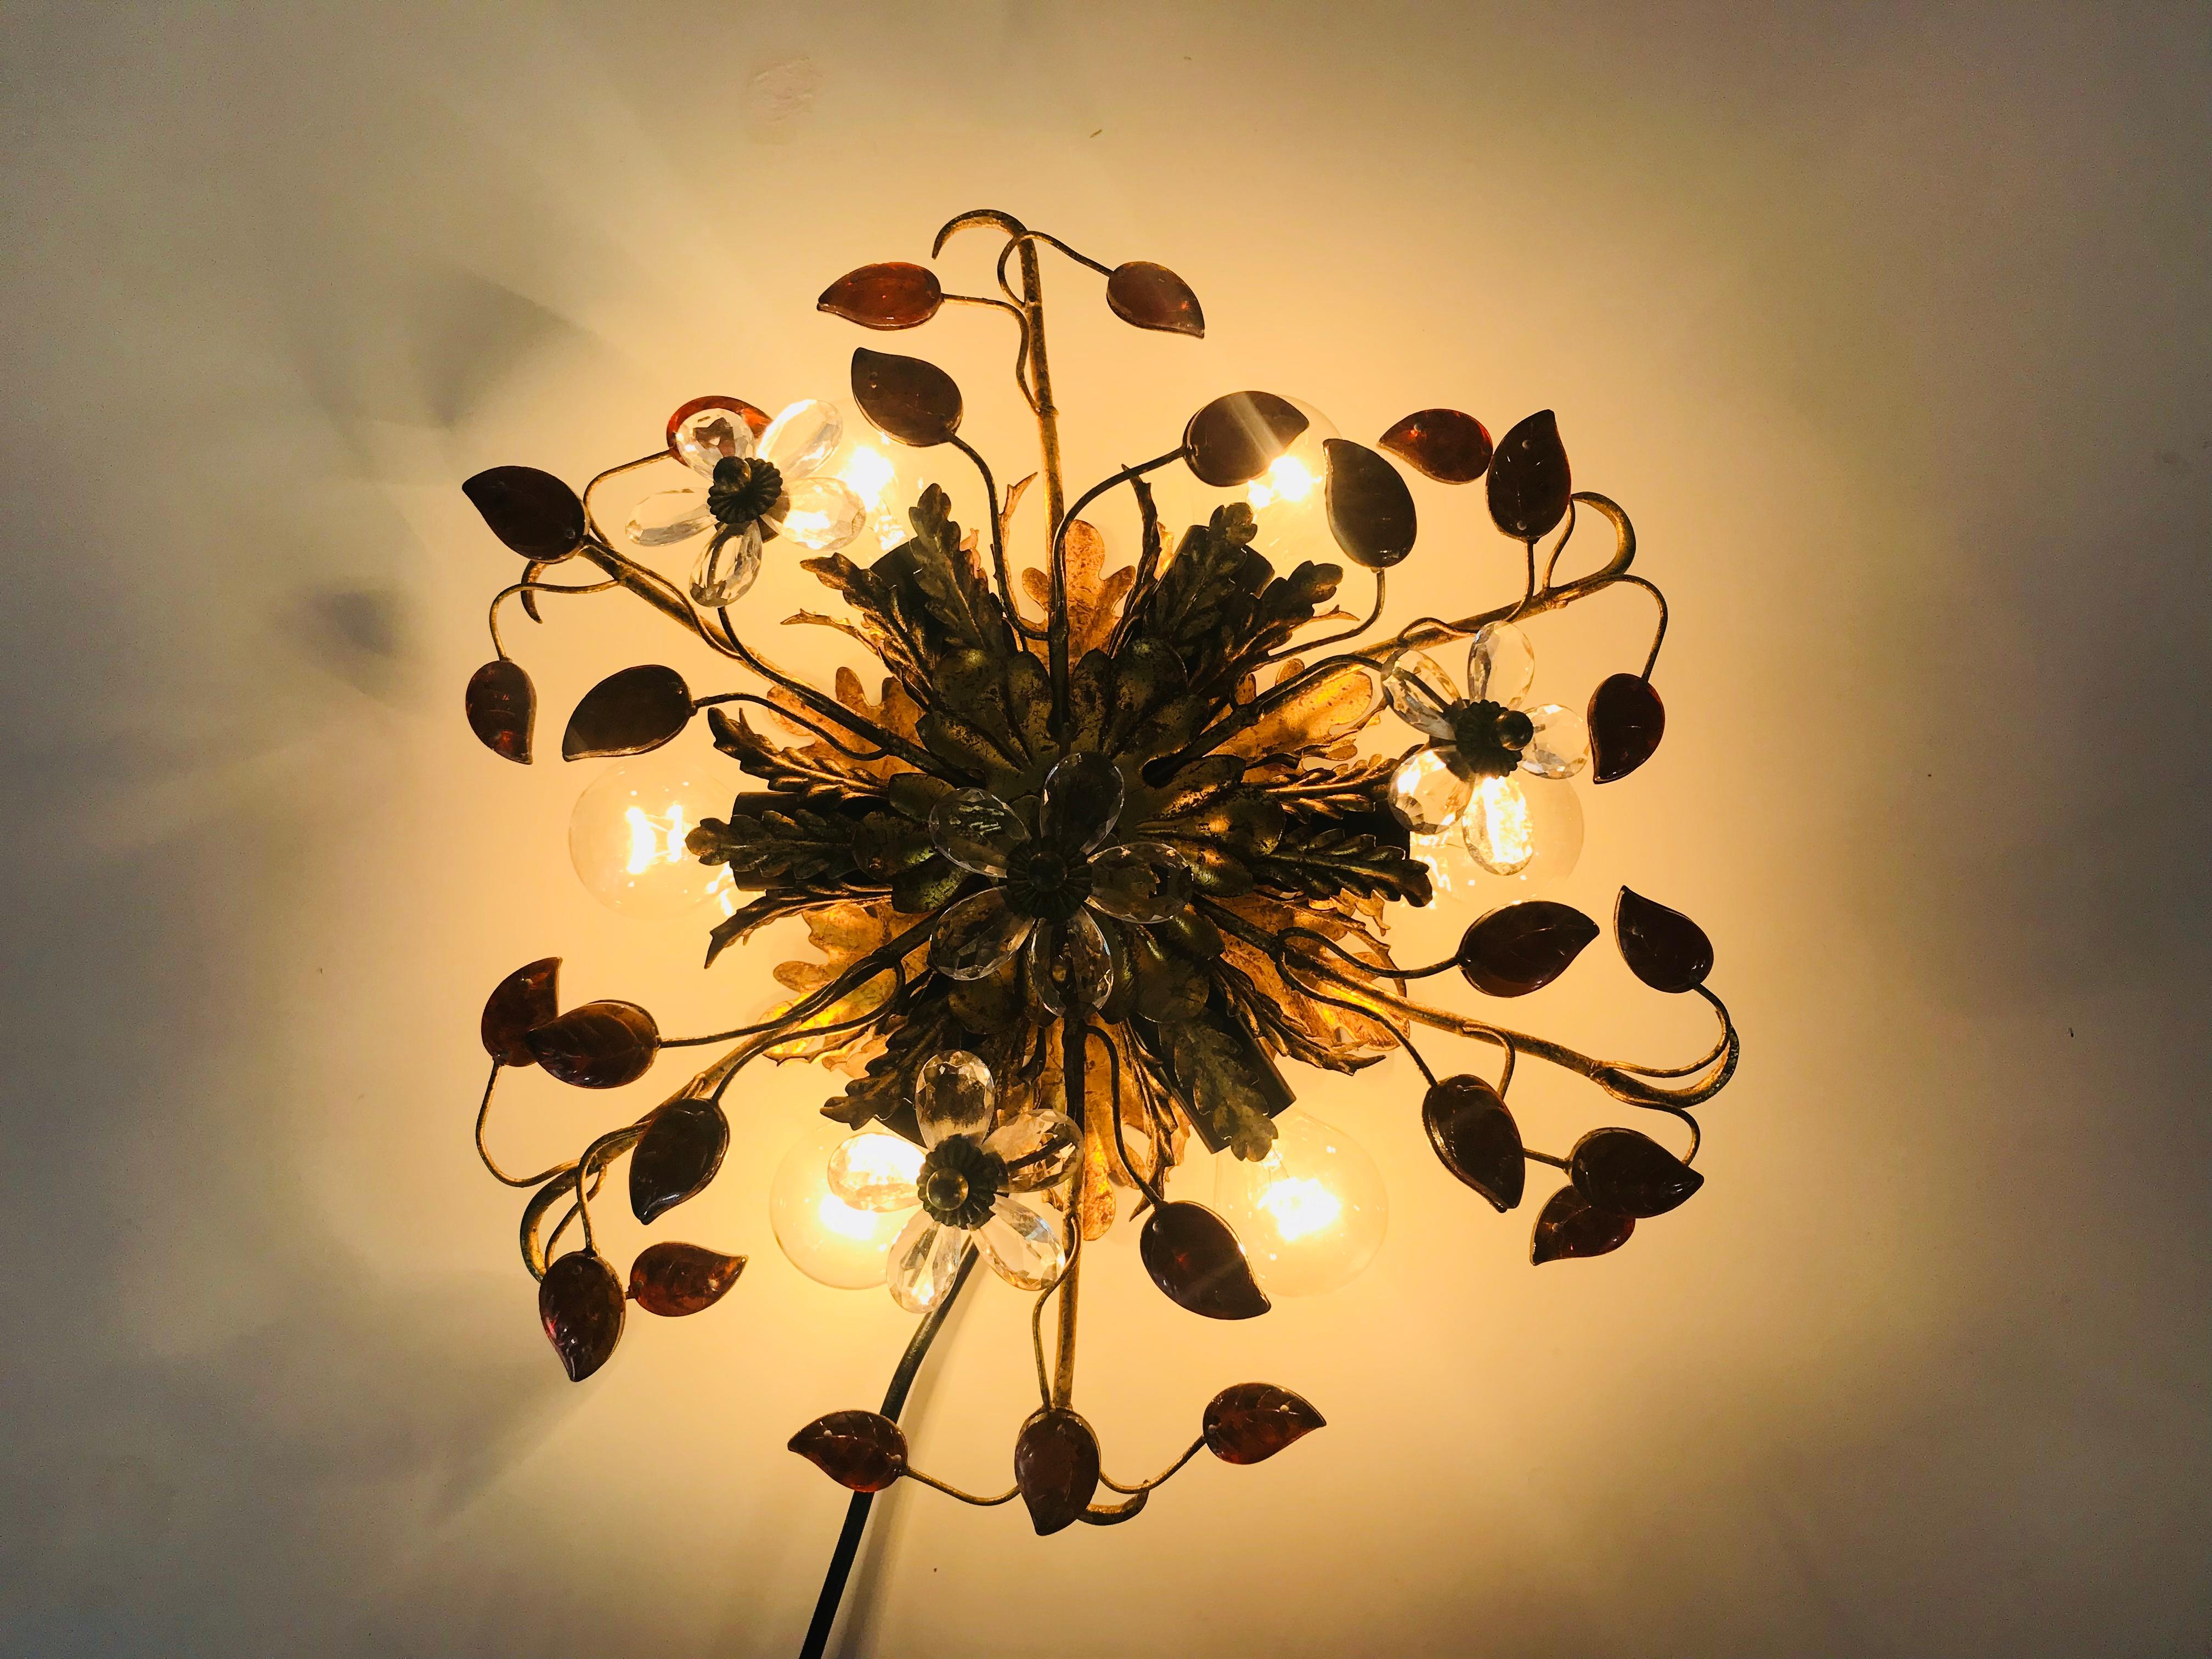 An extraordinarry flush mount by Banci made in Italy in the 1950s. The lamp has a beautiful wheat sheaf design. It is made in the period of Hollywood Regency. The orange leafs are made of Murano glass.

The light requires six E14 light bulbs.